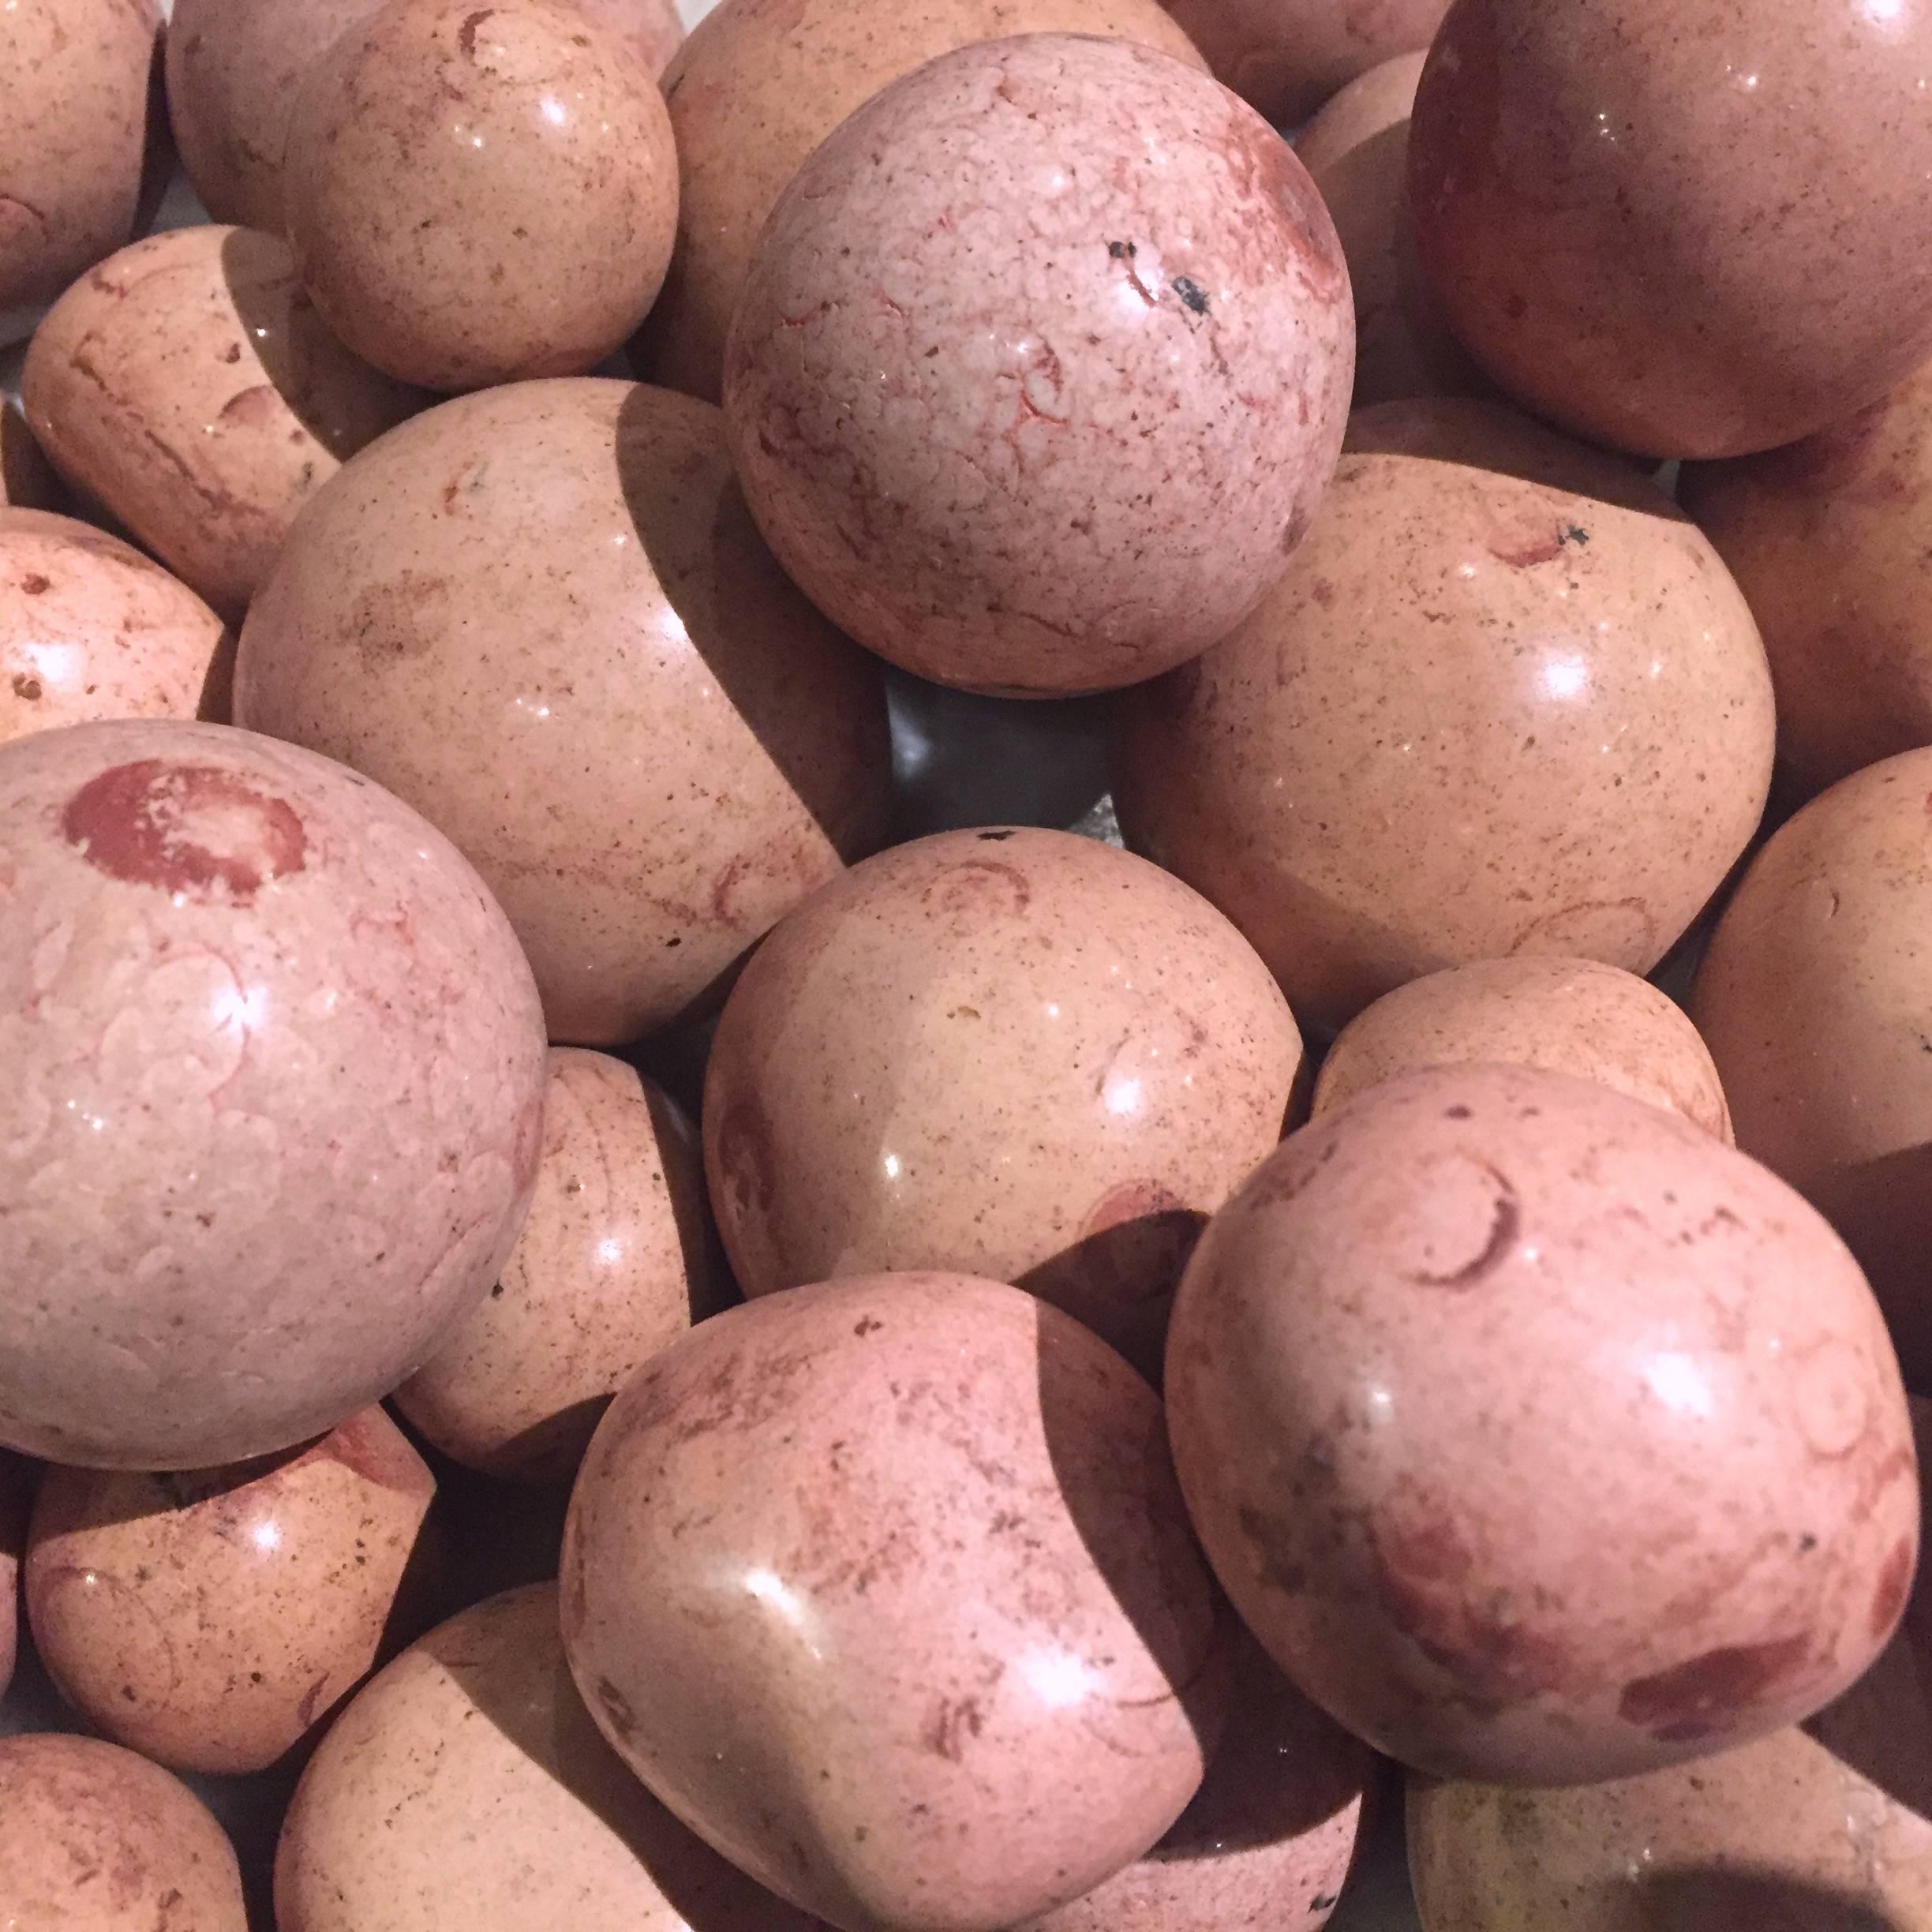 Contemporary Brazilian collection of 25 in total rose colored stone balls.
Three different sizes
Measures: Large 2.5